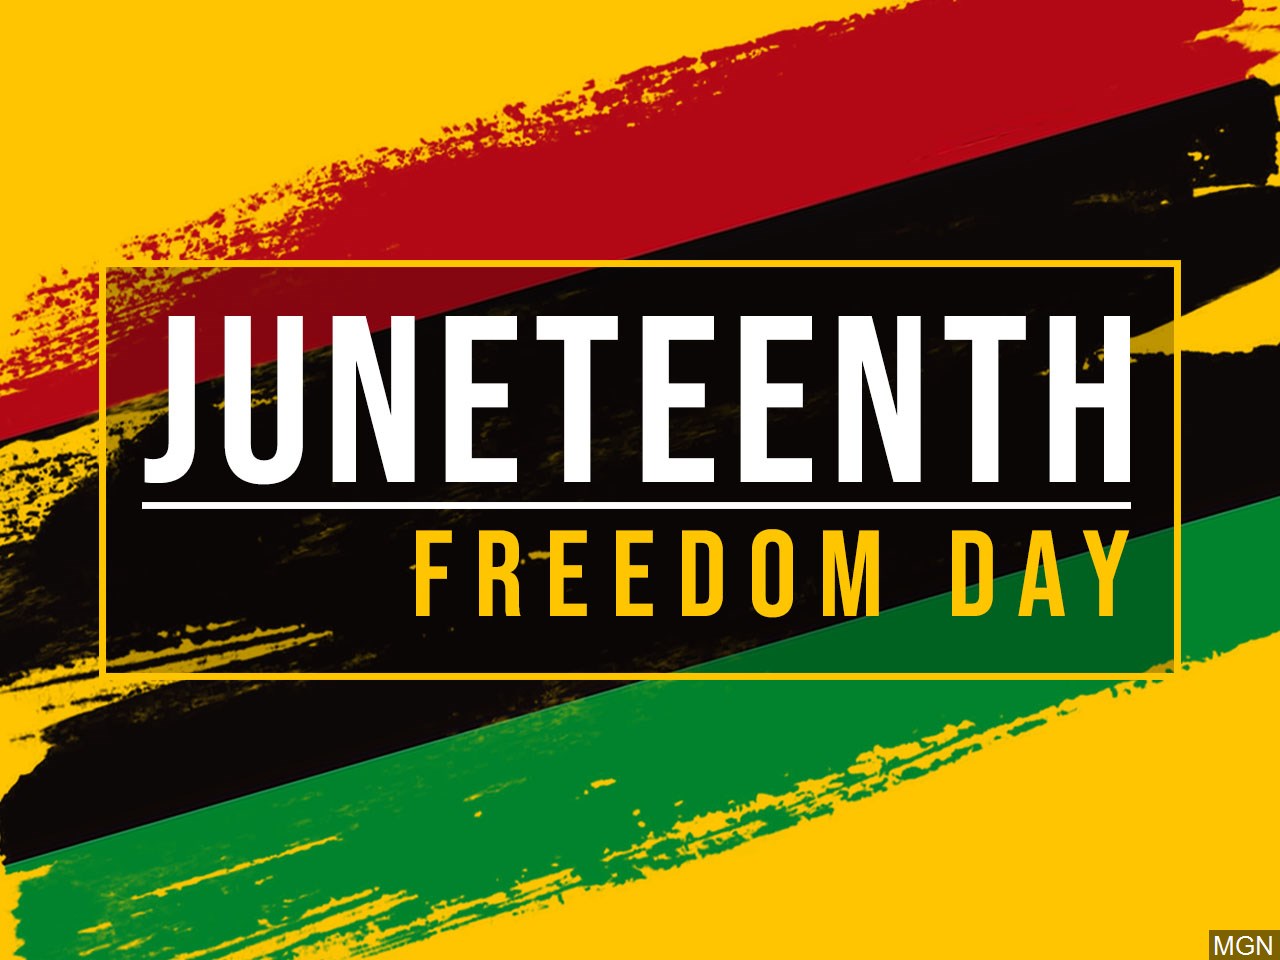 juneteenth organizations to donate to